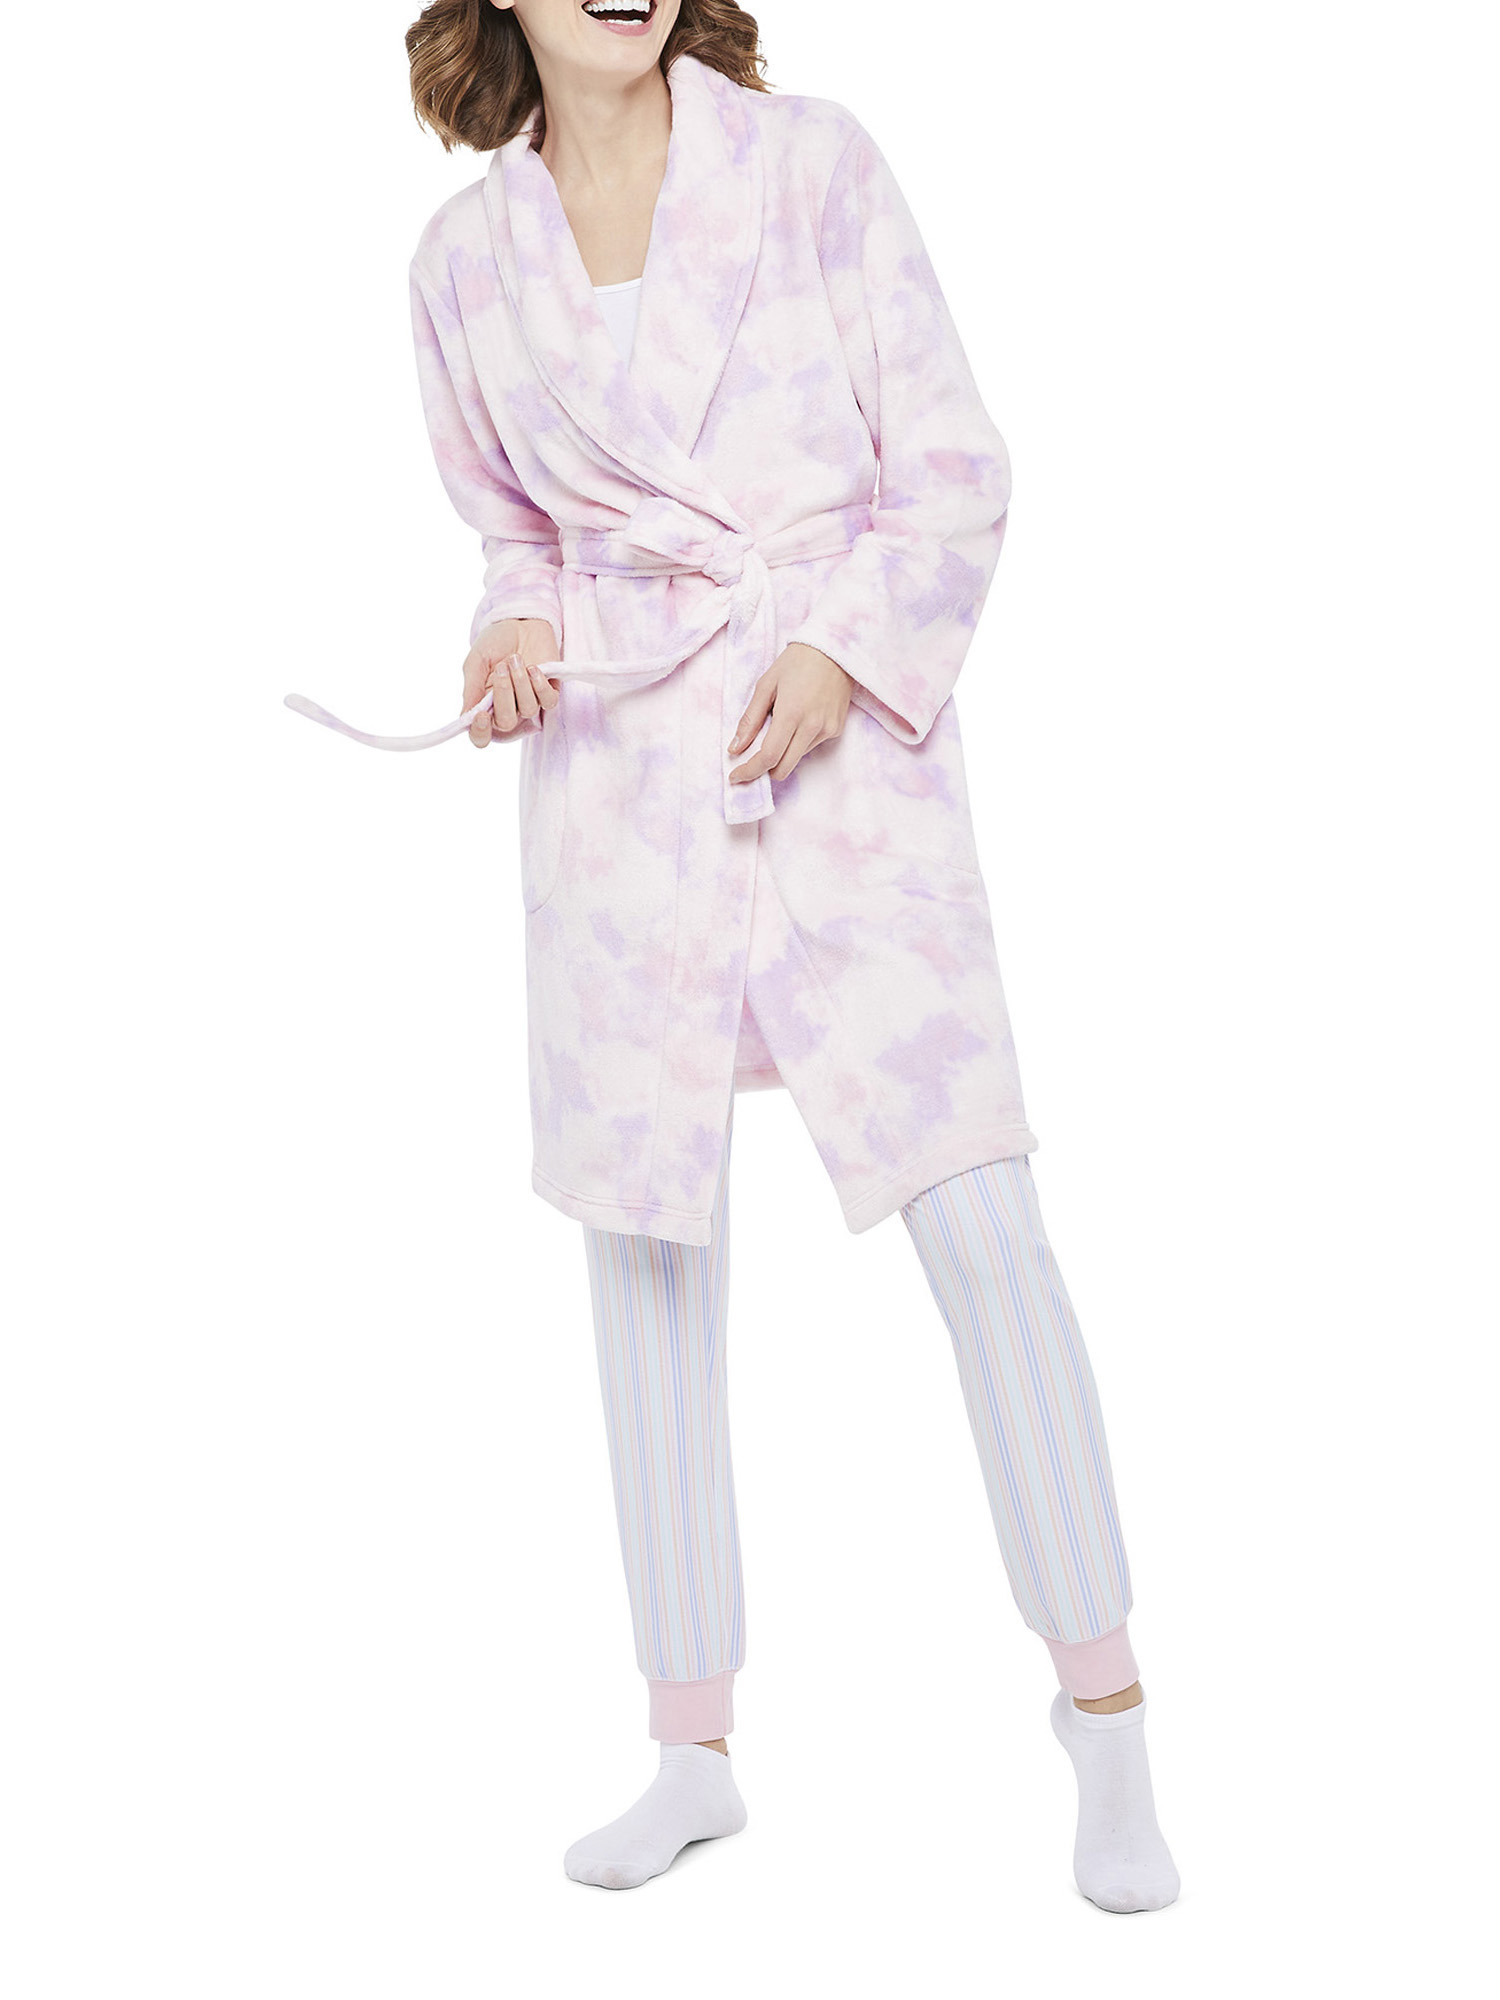 GEORGE Tie Dye Afternoon Polyester Robe (Women's or Women's Plus) 1 Pack - image 1 of 7